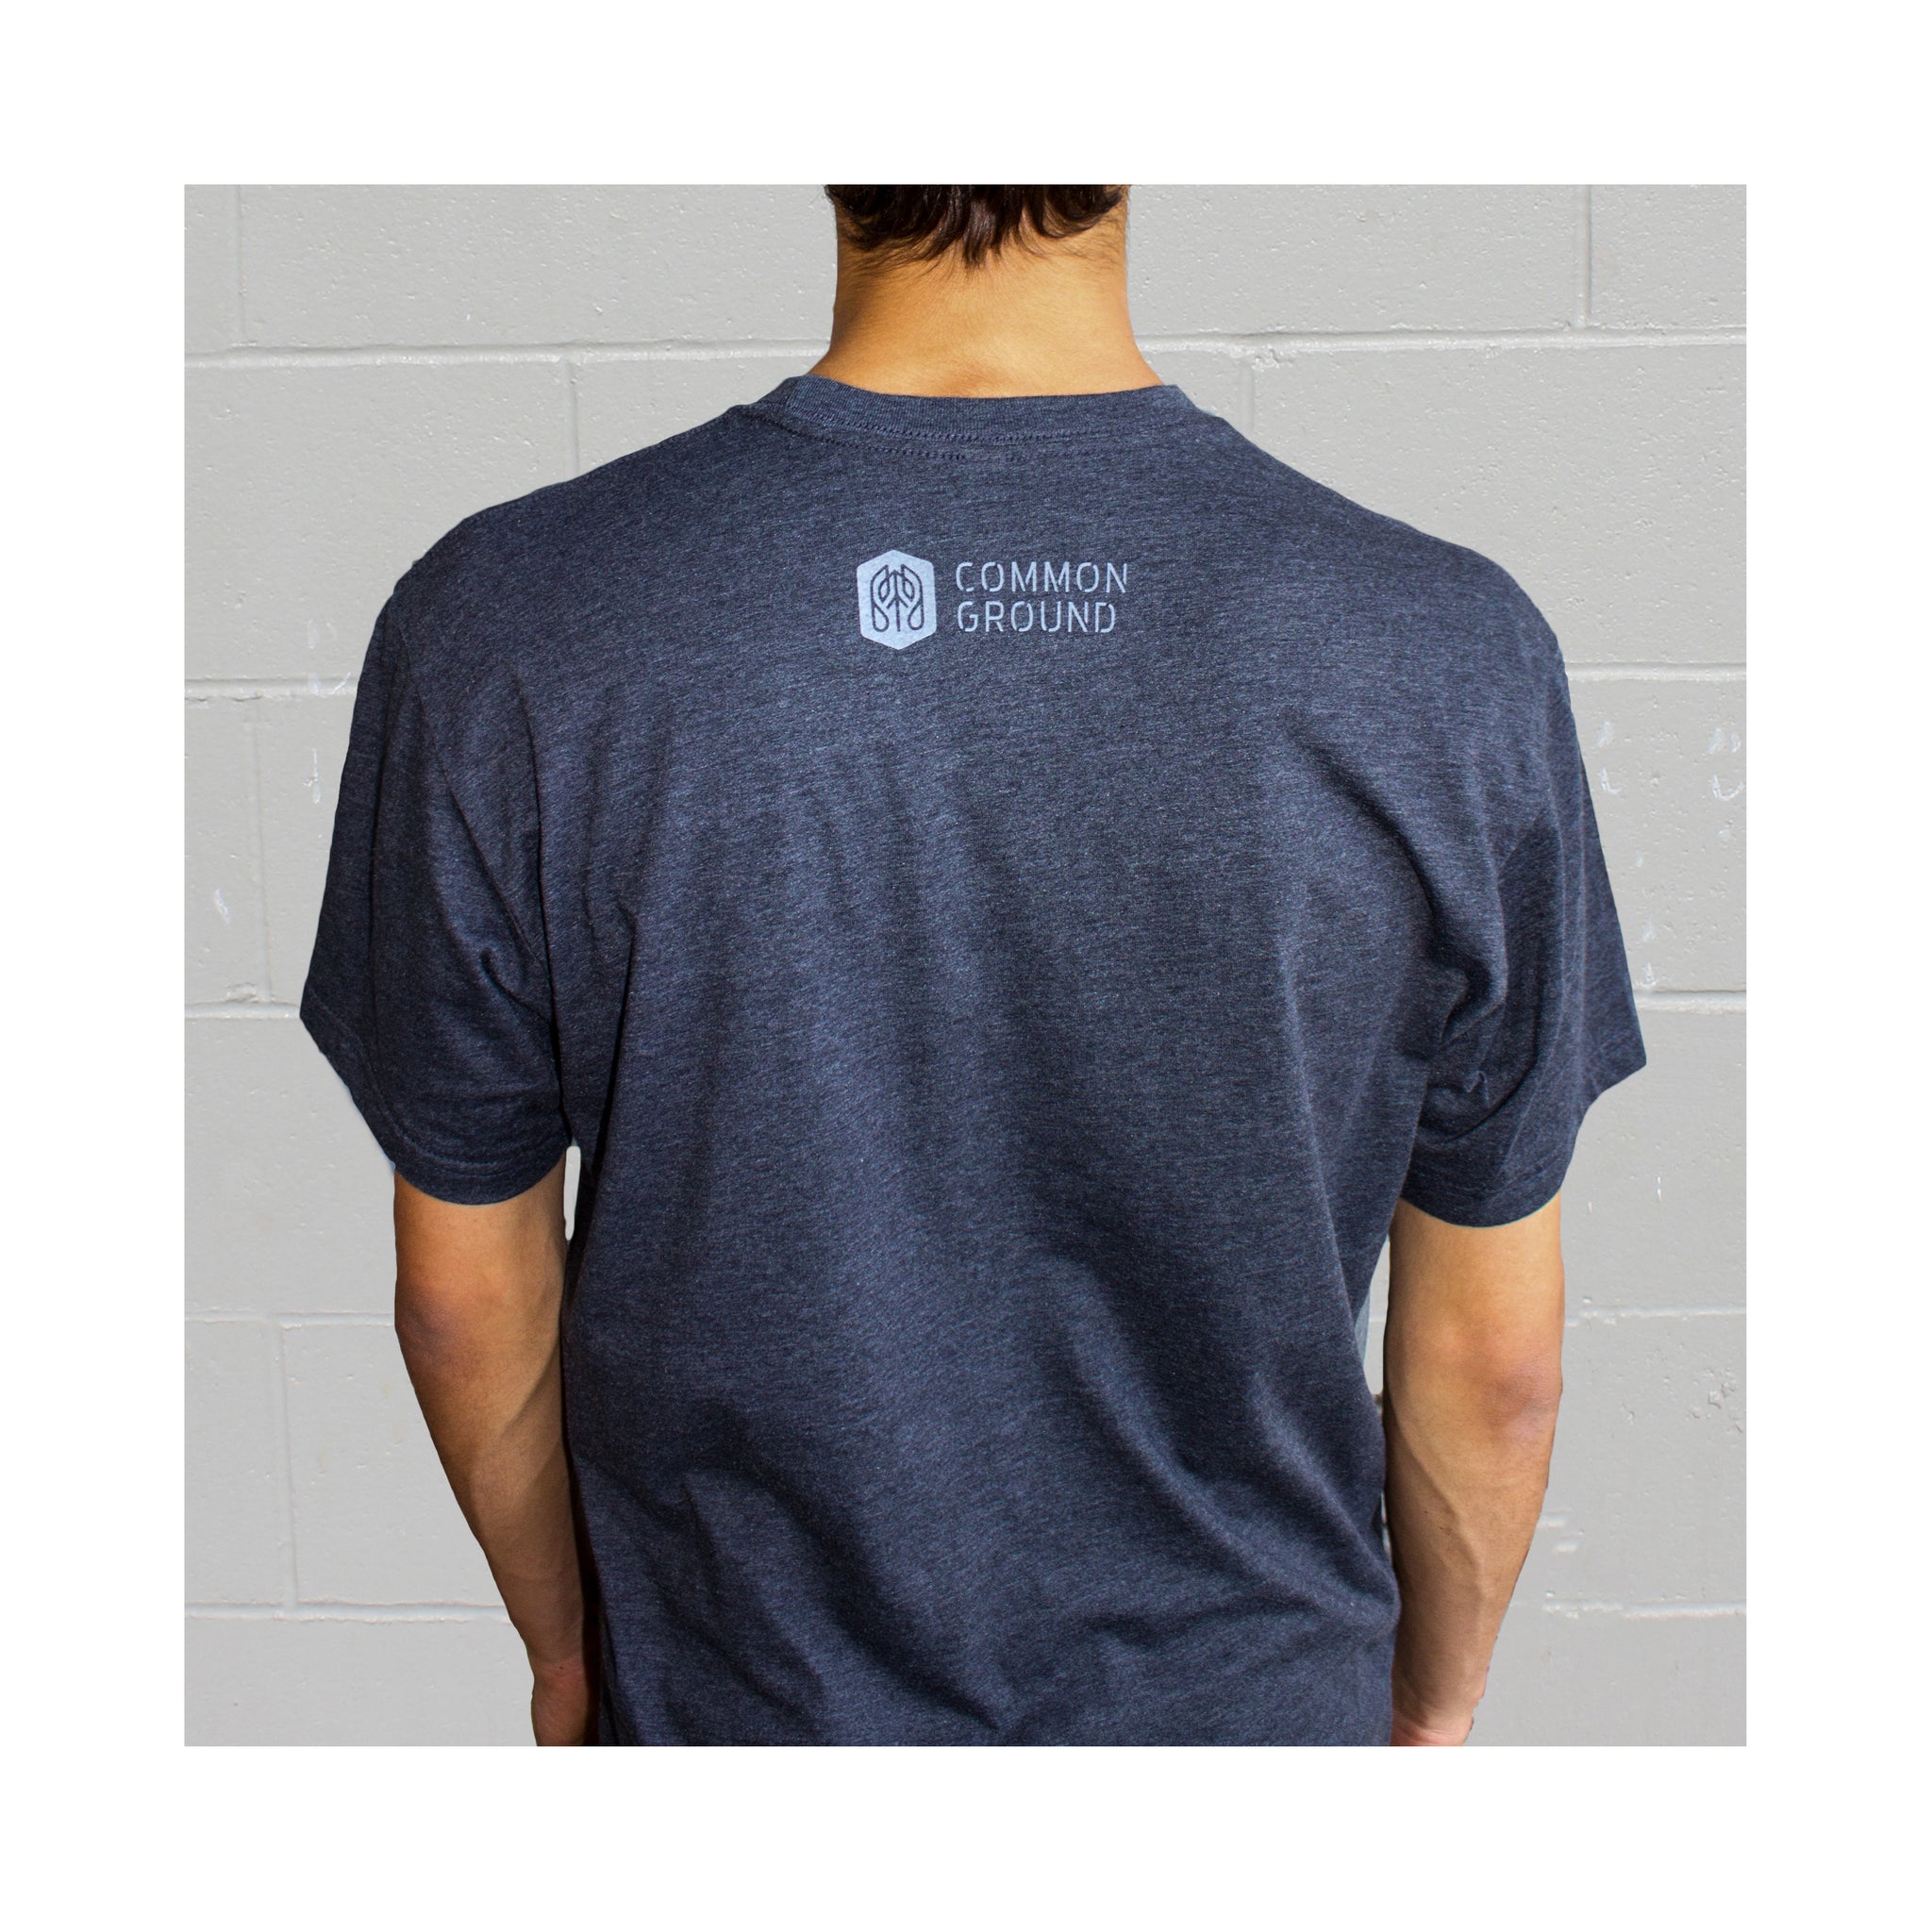 Charcoal - Common Ground T shirt Back on Model